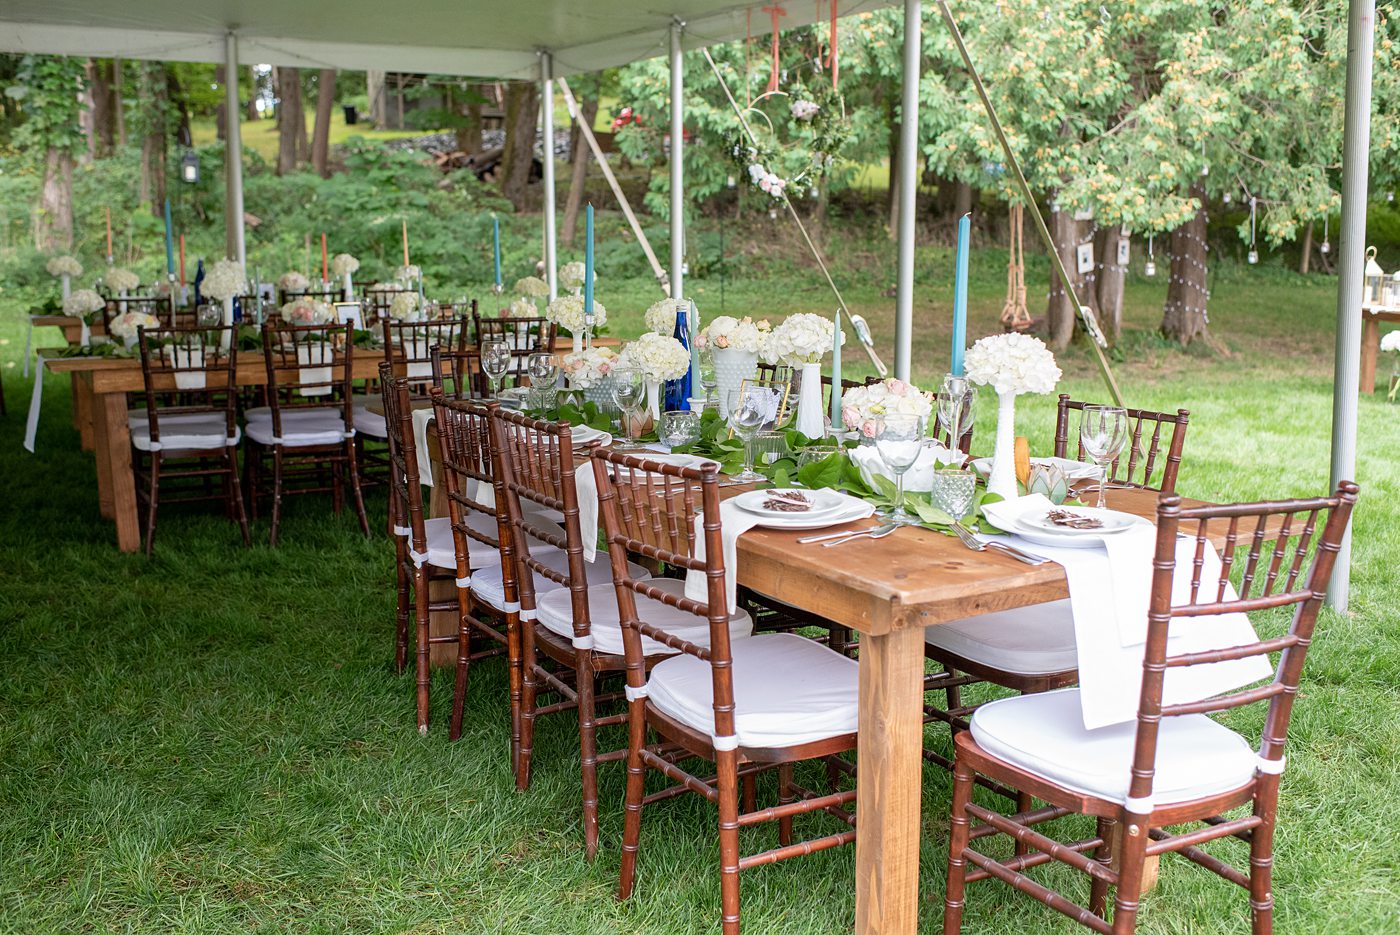 Saratoga Springs destination wedding photos in upstate New York by Mikkel Paige Photography, NY wedding photographer. The bride and groom tented a lawn for their reception. They had wood Chiavari chairs, milk glass and vintage salt and pepper shakers on each table. The table numbers were destinations the couple had been. #mikkelpaige #saratogaspringswedding #destinationwedding #lakefrontwedding #waterfrontwedding #lakewedding #tablenumbers #weddingreception #intimatewedding